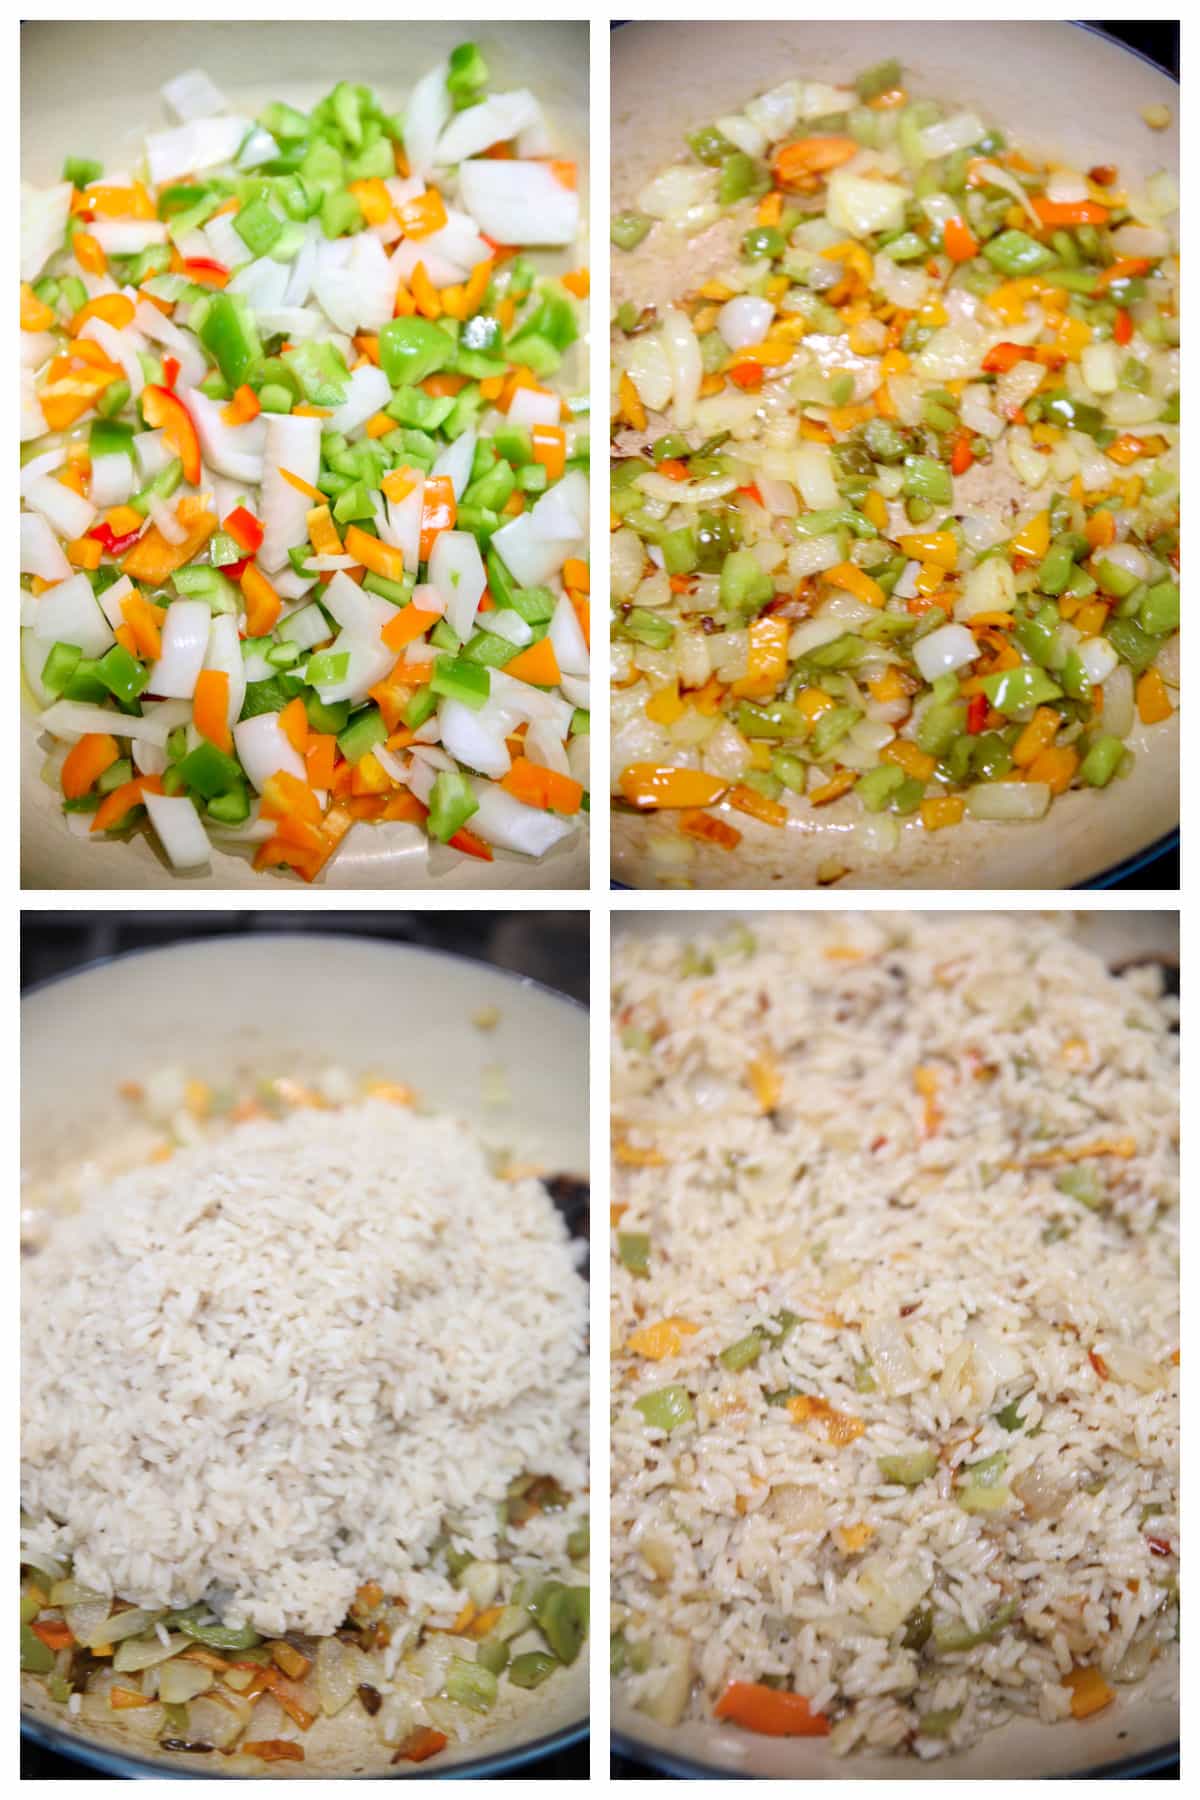 Making rice pilaf with bell peppers and onions.